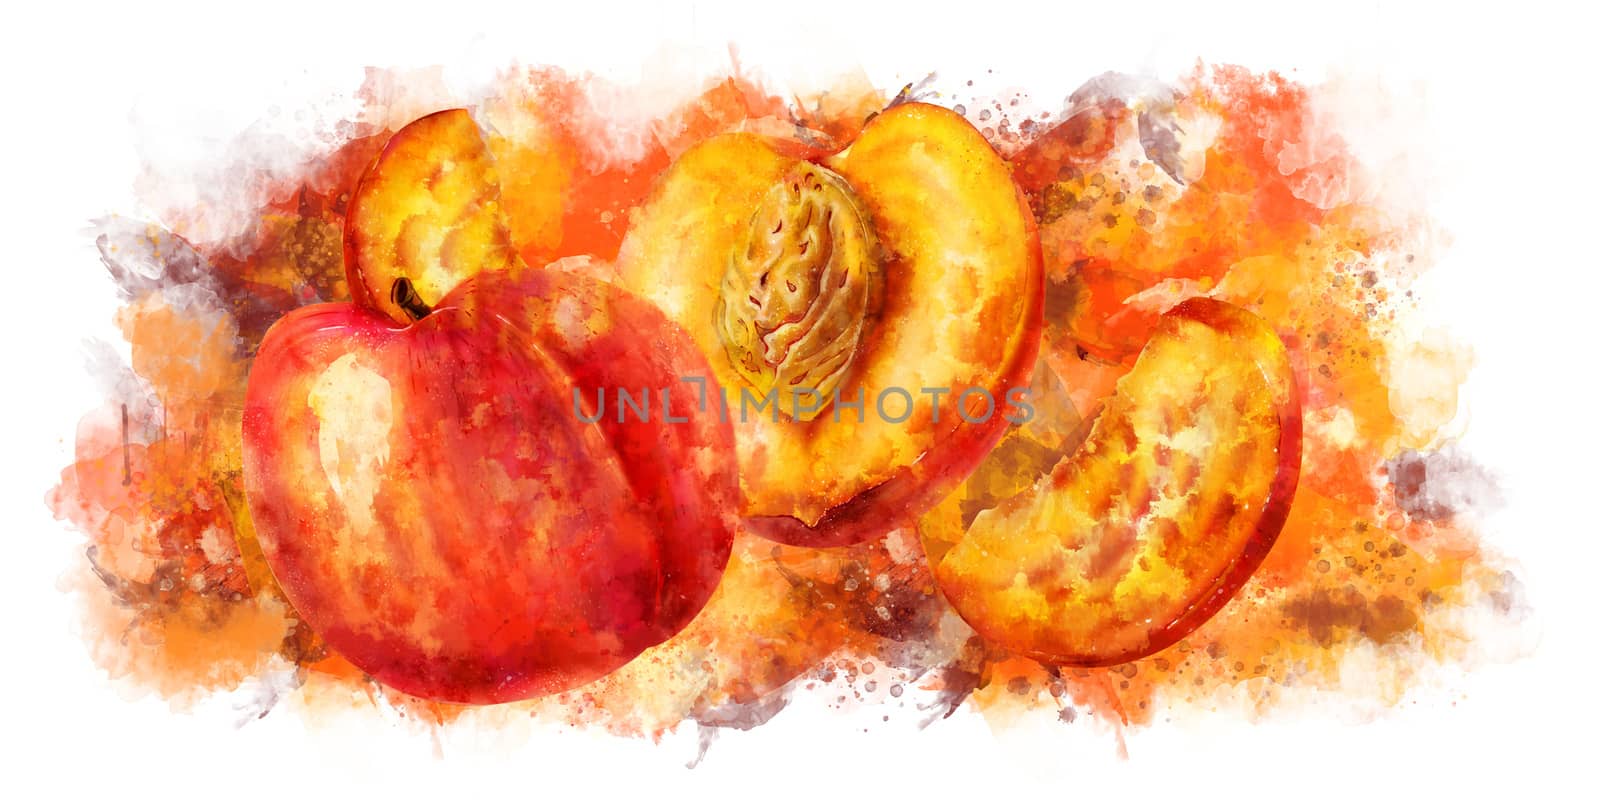 Peach on white background. Watercolor illustration by ConceptCafe